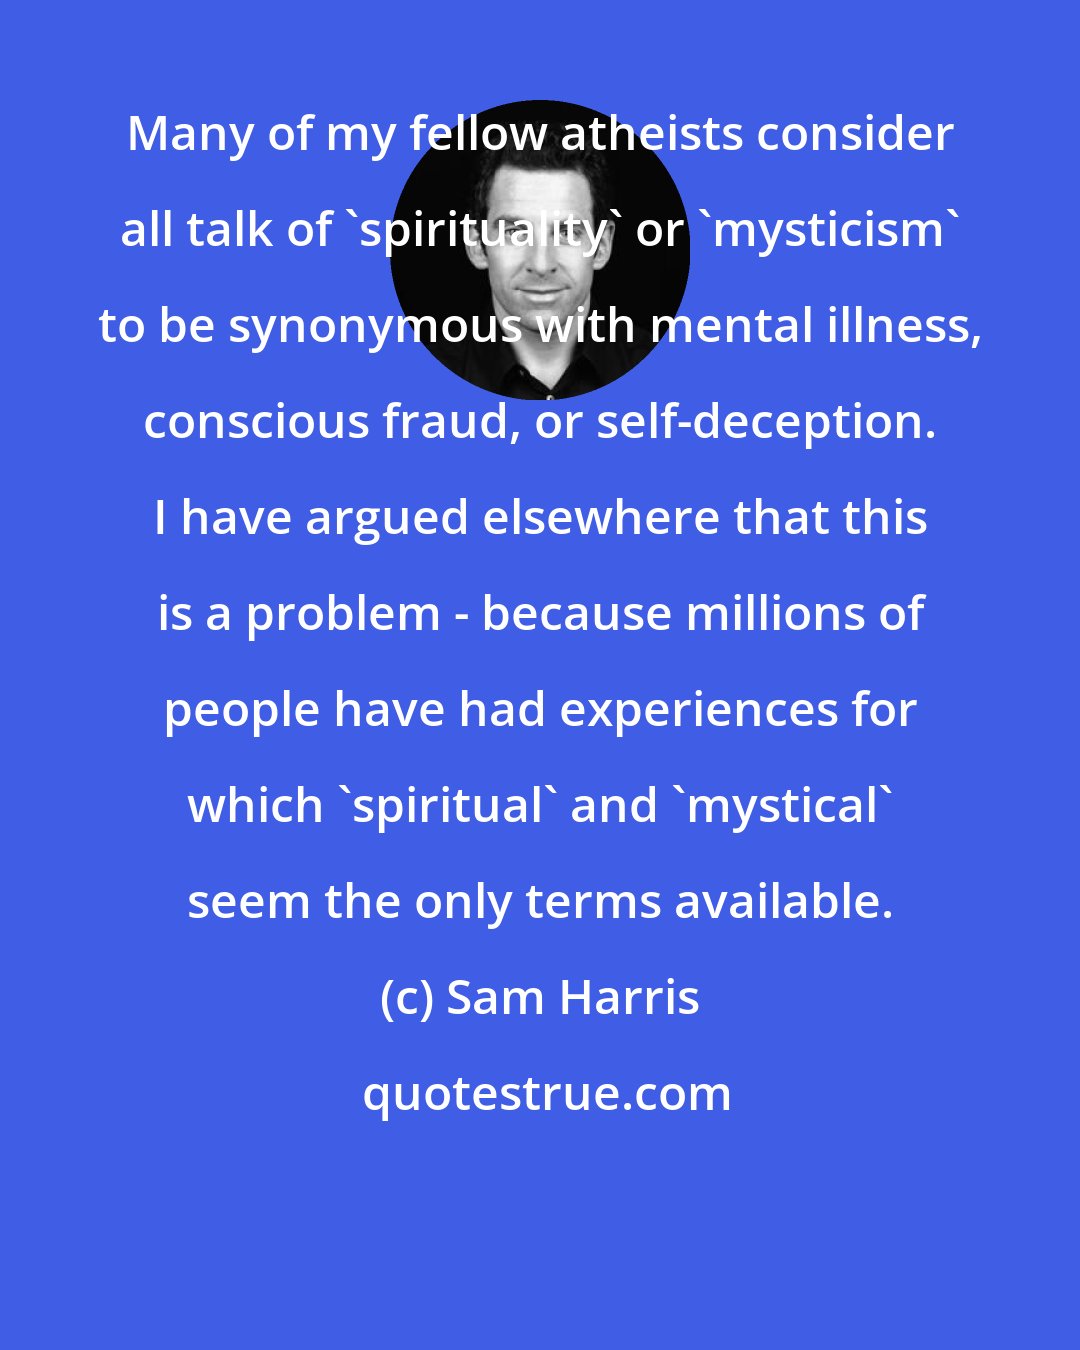 Sam Harris: Many of my fellow atheists consider all talk of 'spirituality' or 'mysticism' to be synonymous with mental illness, conscious fraud, or self-deception. I have argued elsewhere that this is a problem - because millions of people have had experiences for which 'spiritual' and 'mystical' seem the only terms available.